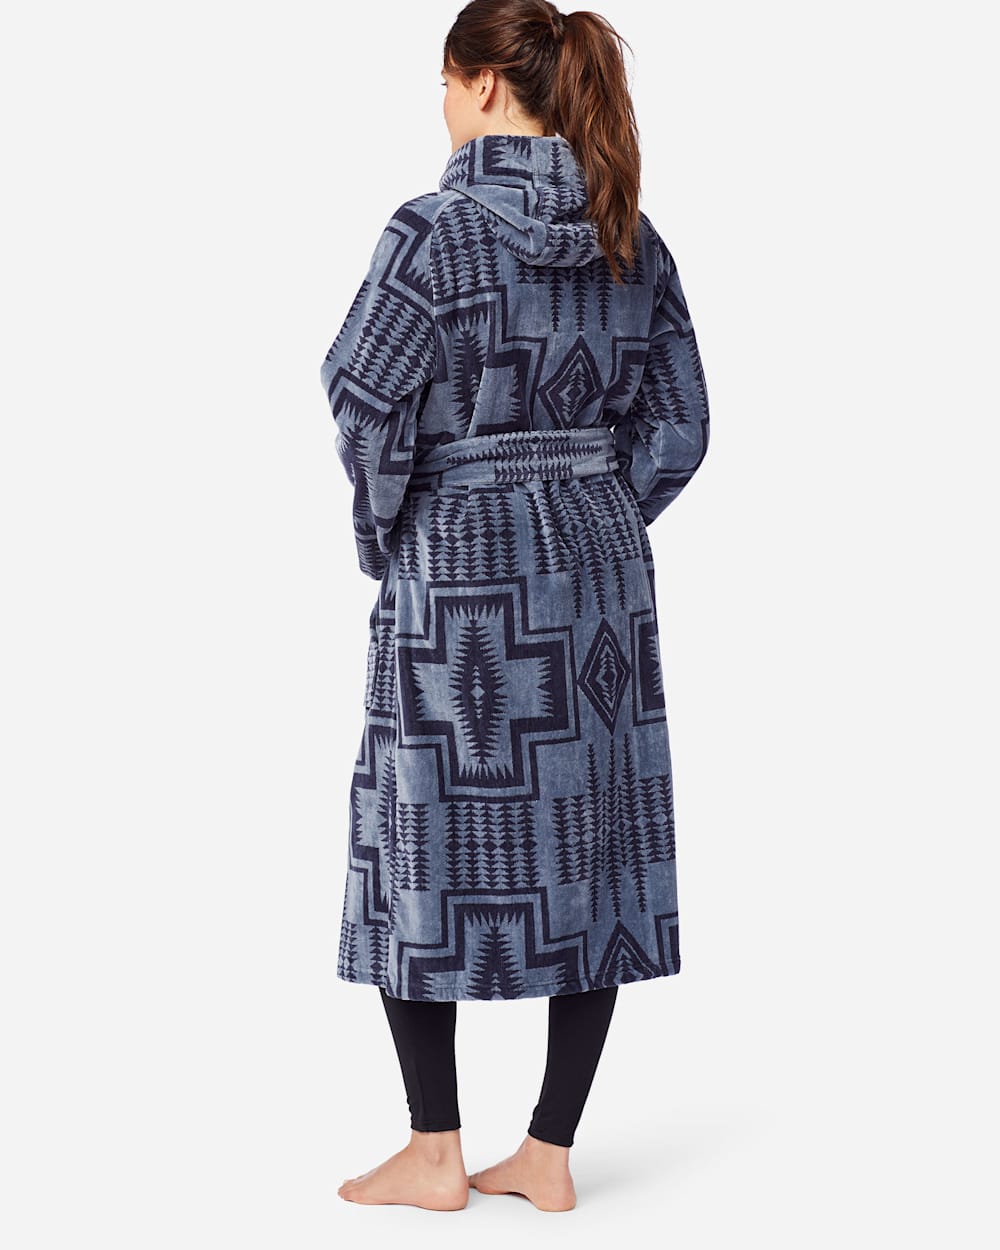 ALTERNATE VIEW OF WOMEN'S JACQUARD TERRY ROBE IN DUSK BLUE HARDING image number 2